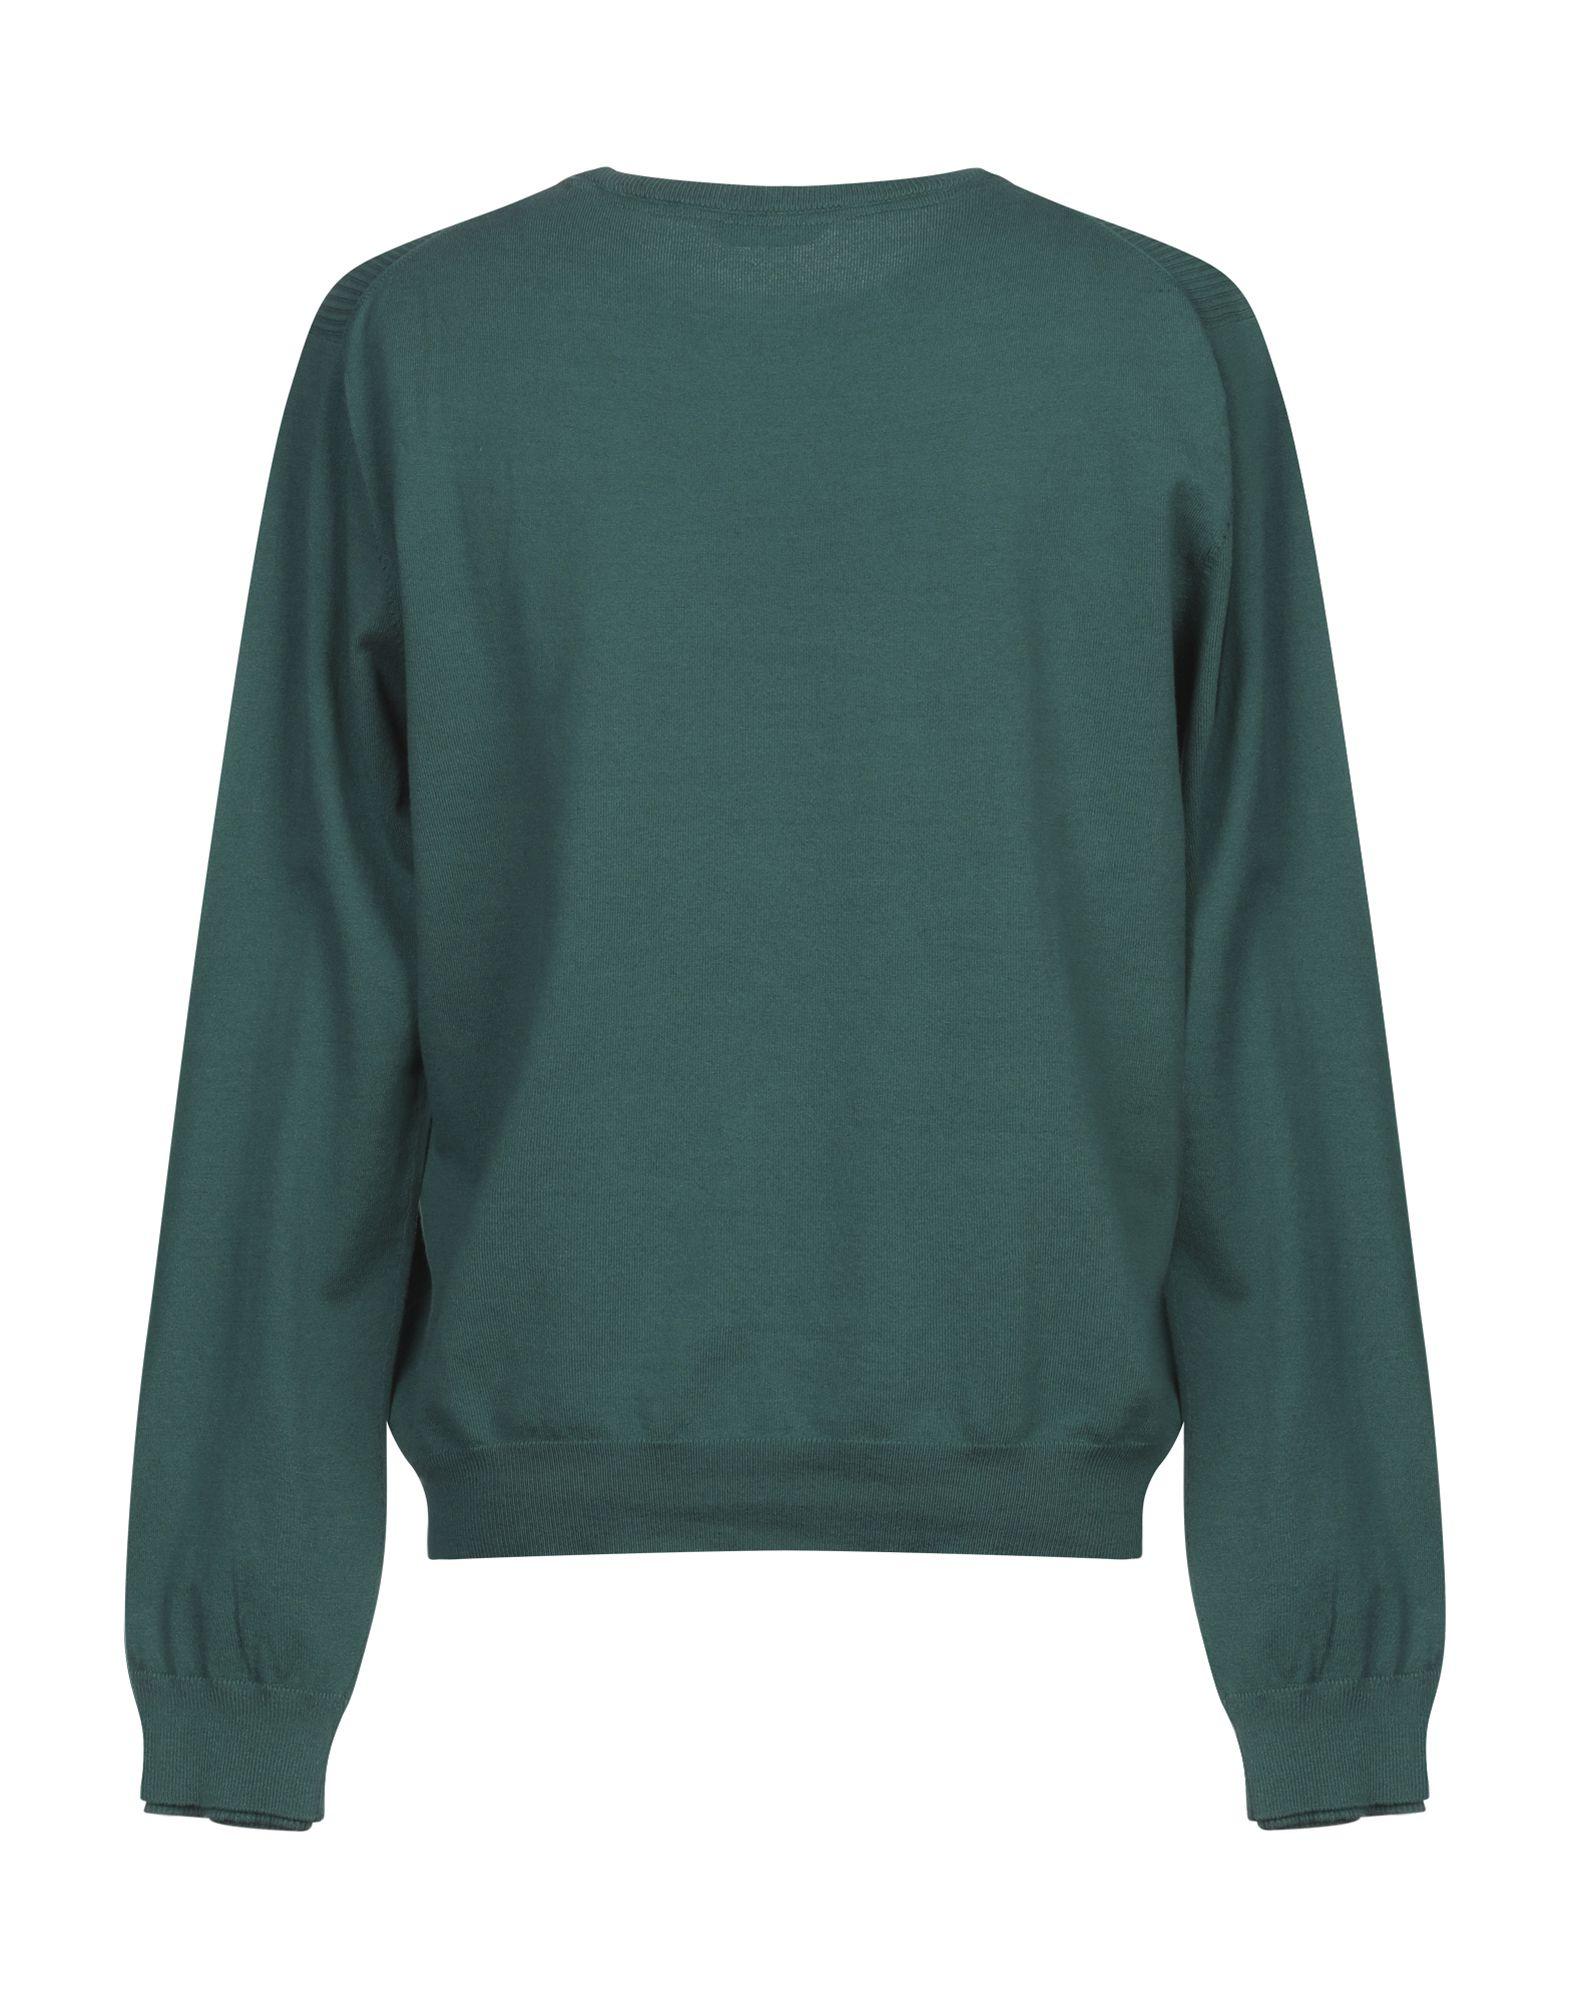 Guess Sweater in Green for Men - Lyst